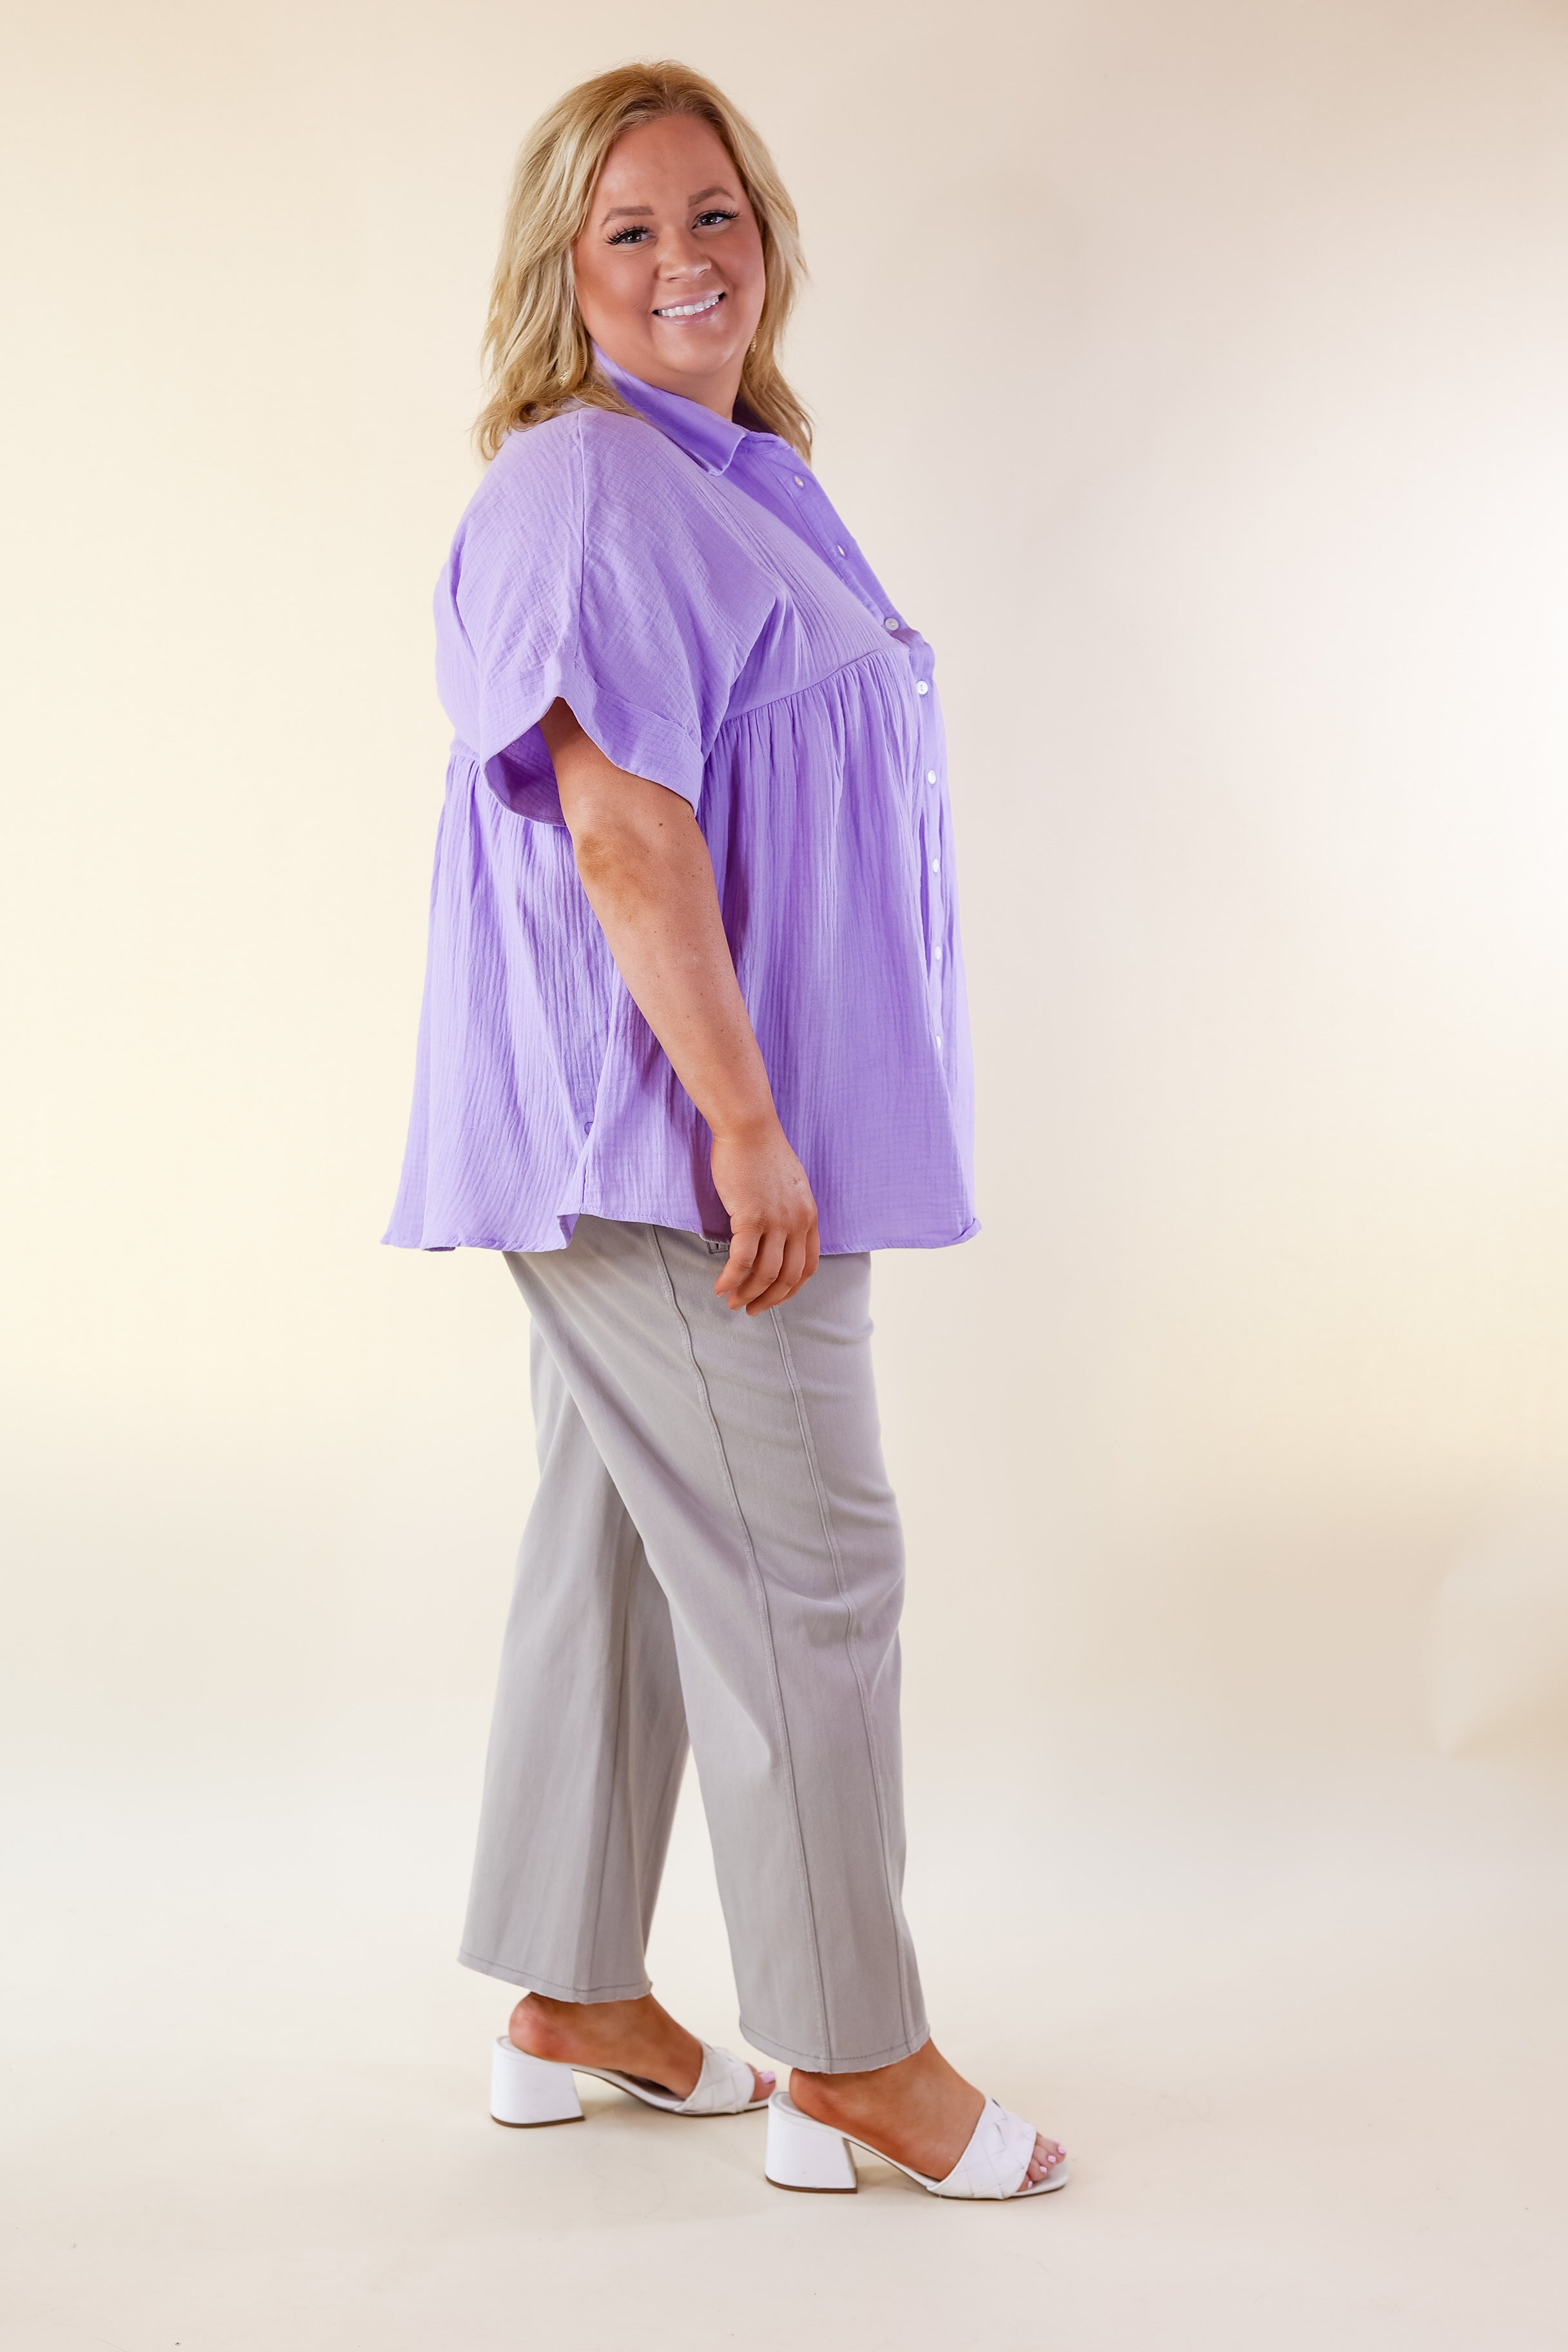 Vacation Vibes Collared Button Up Babydoll Top in Lavender Purple - Giddy Up Glamour Boutique